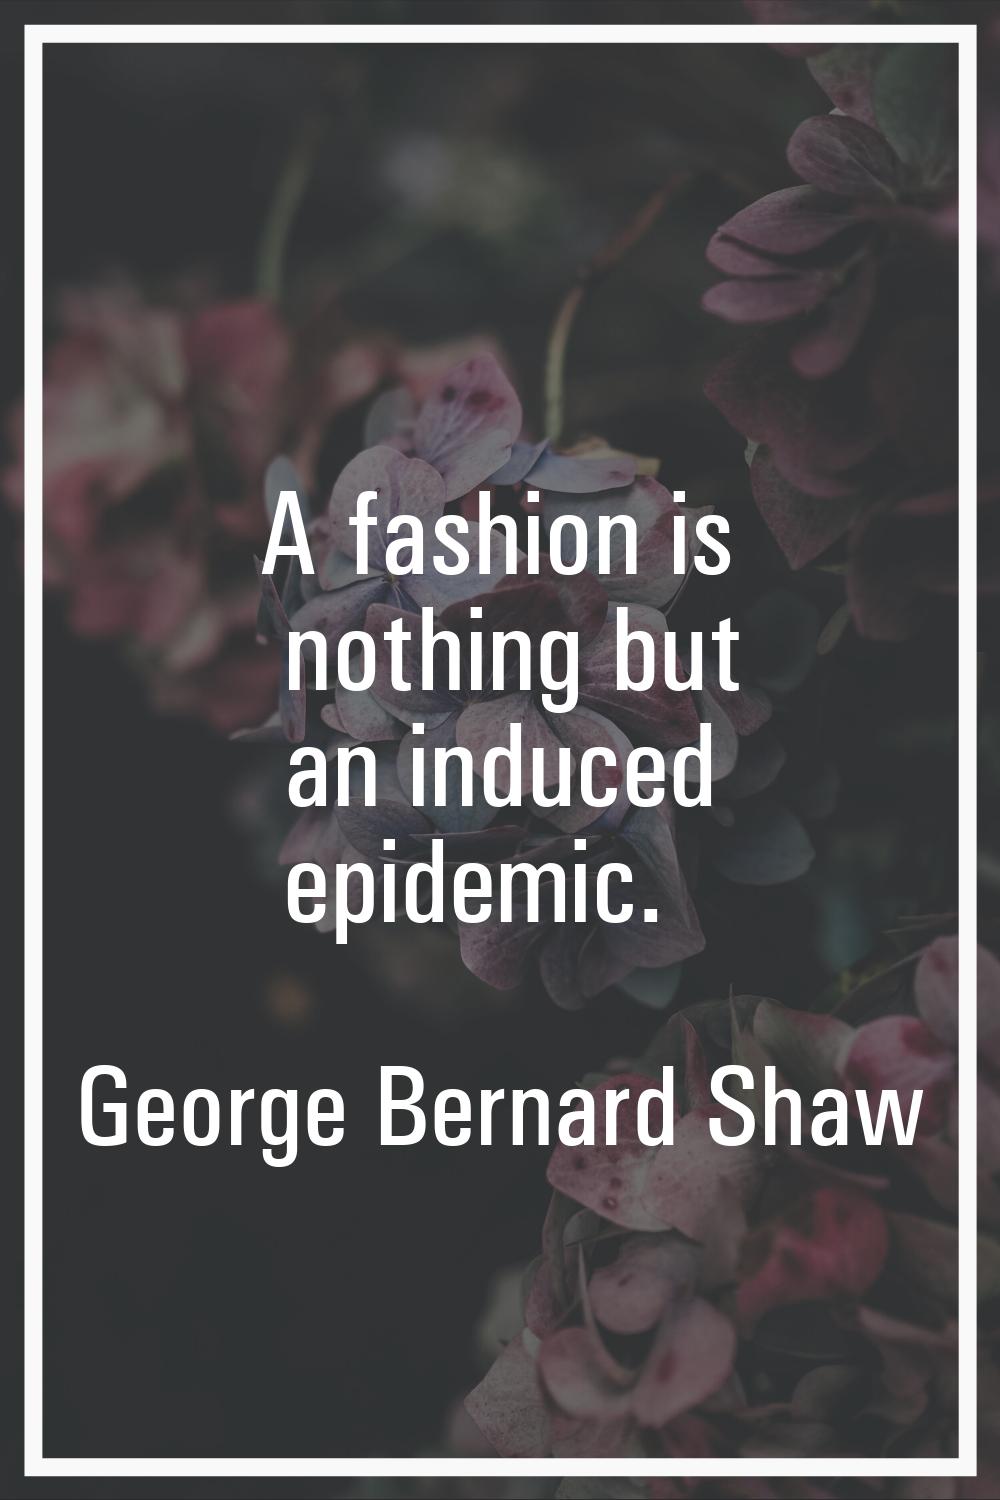 A fashion is nothing but an induced epidemic.